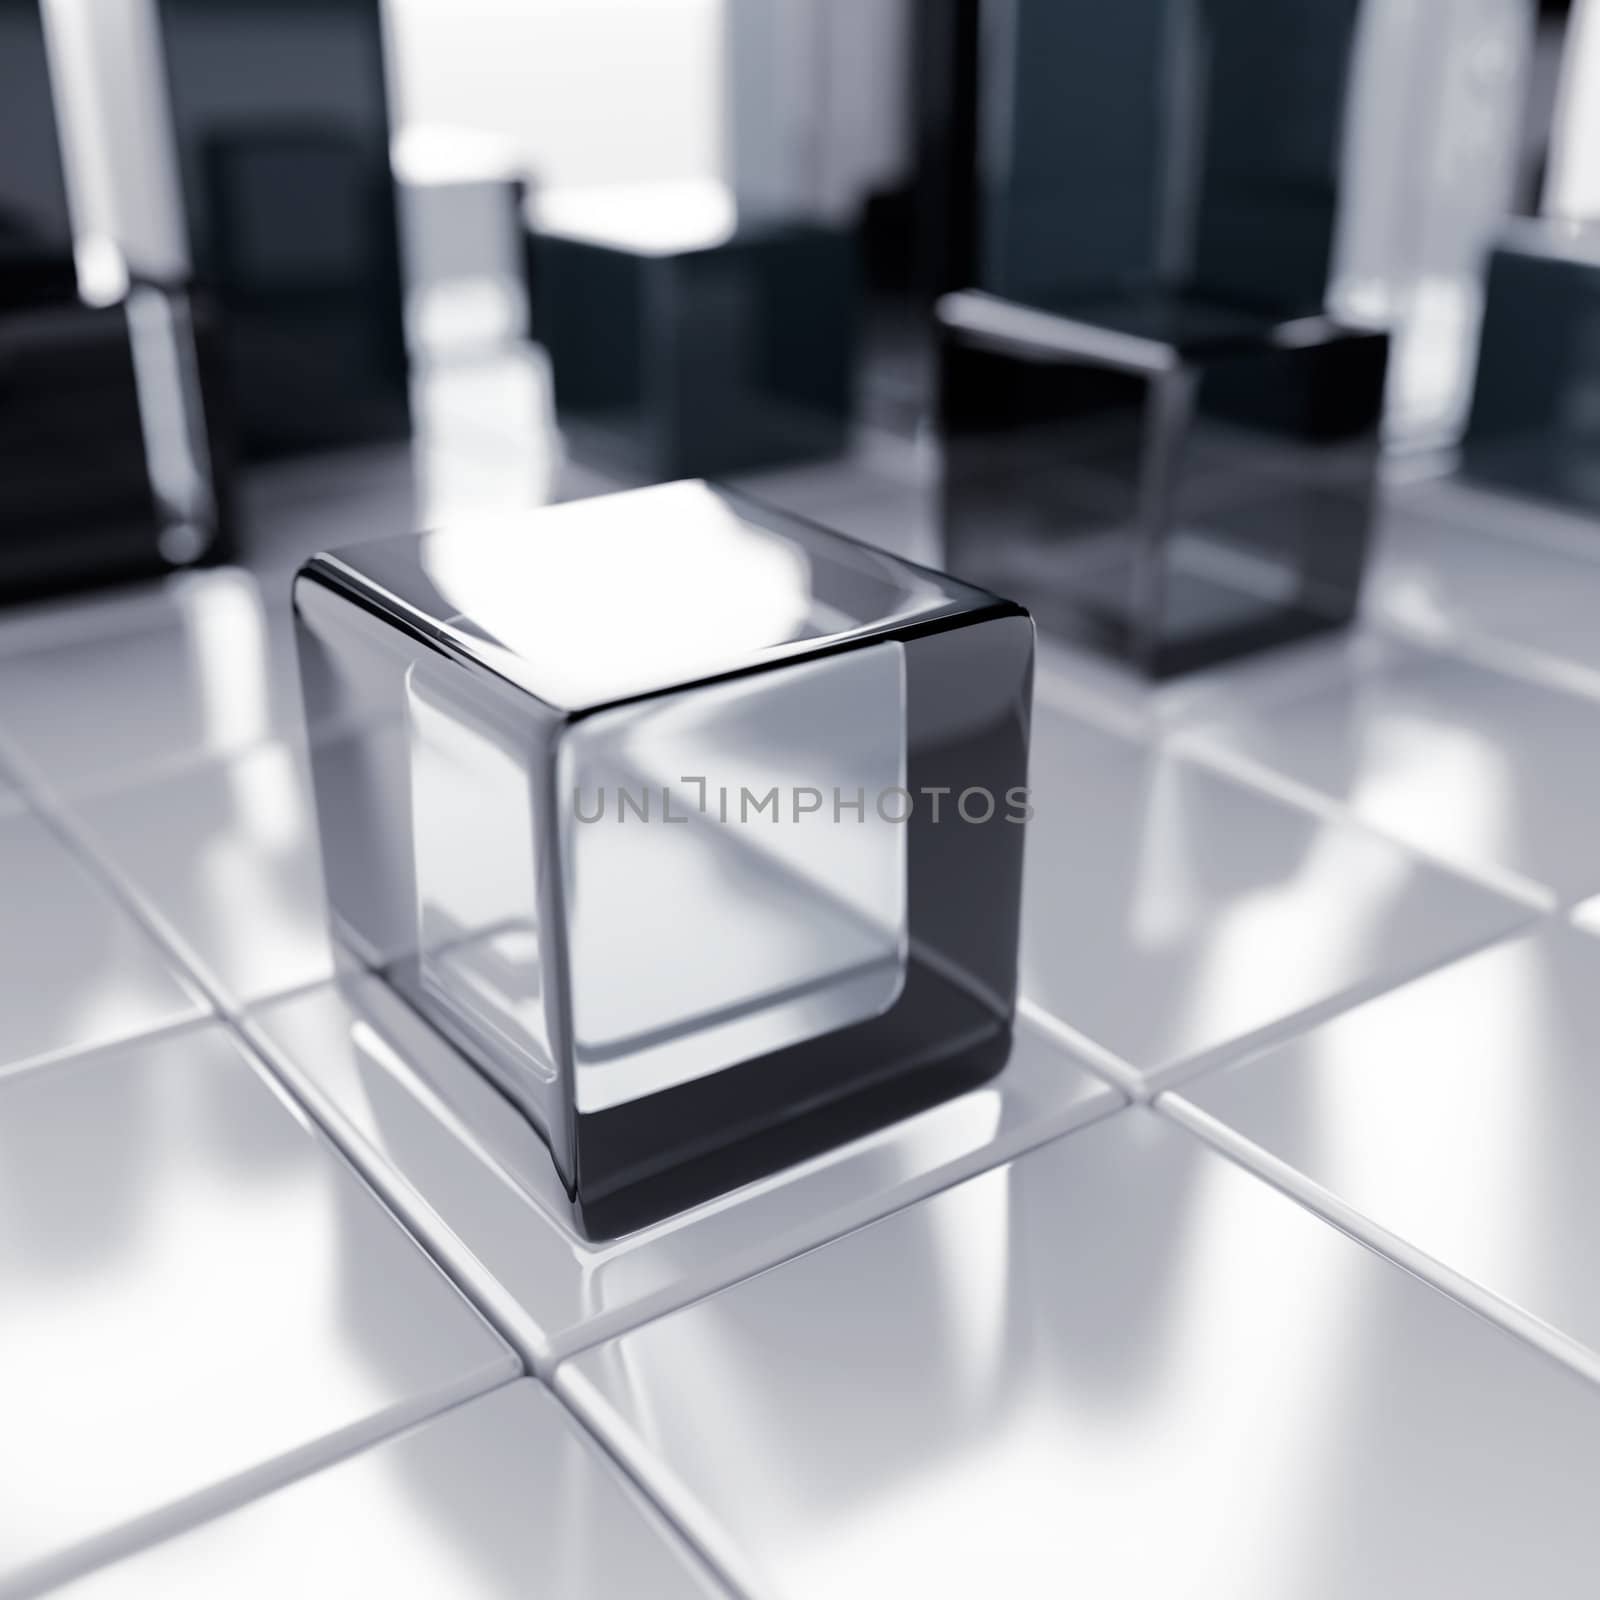 Abstract glass and blue metallic cubes on a white